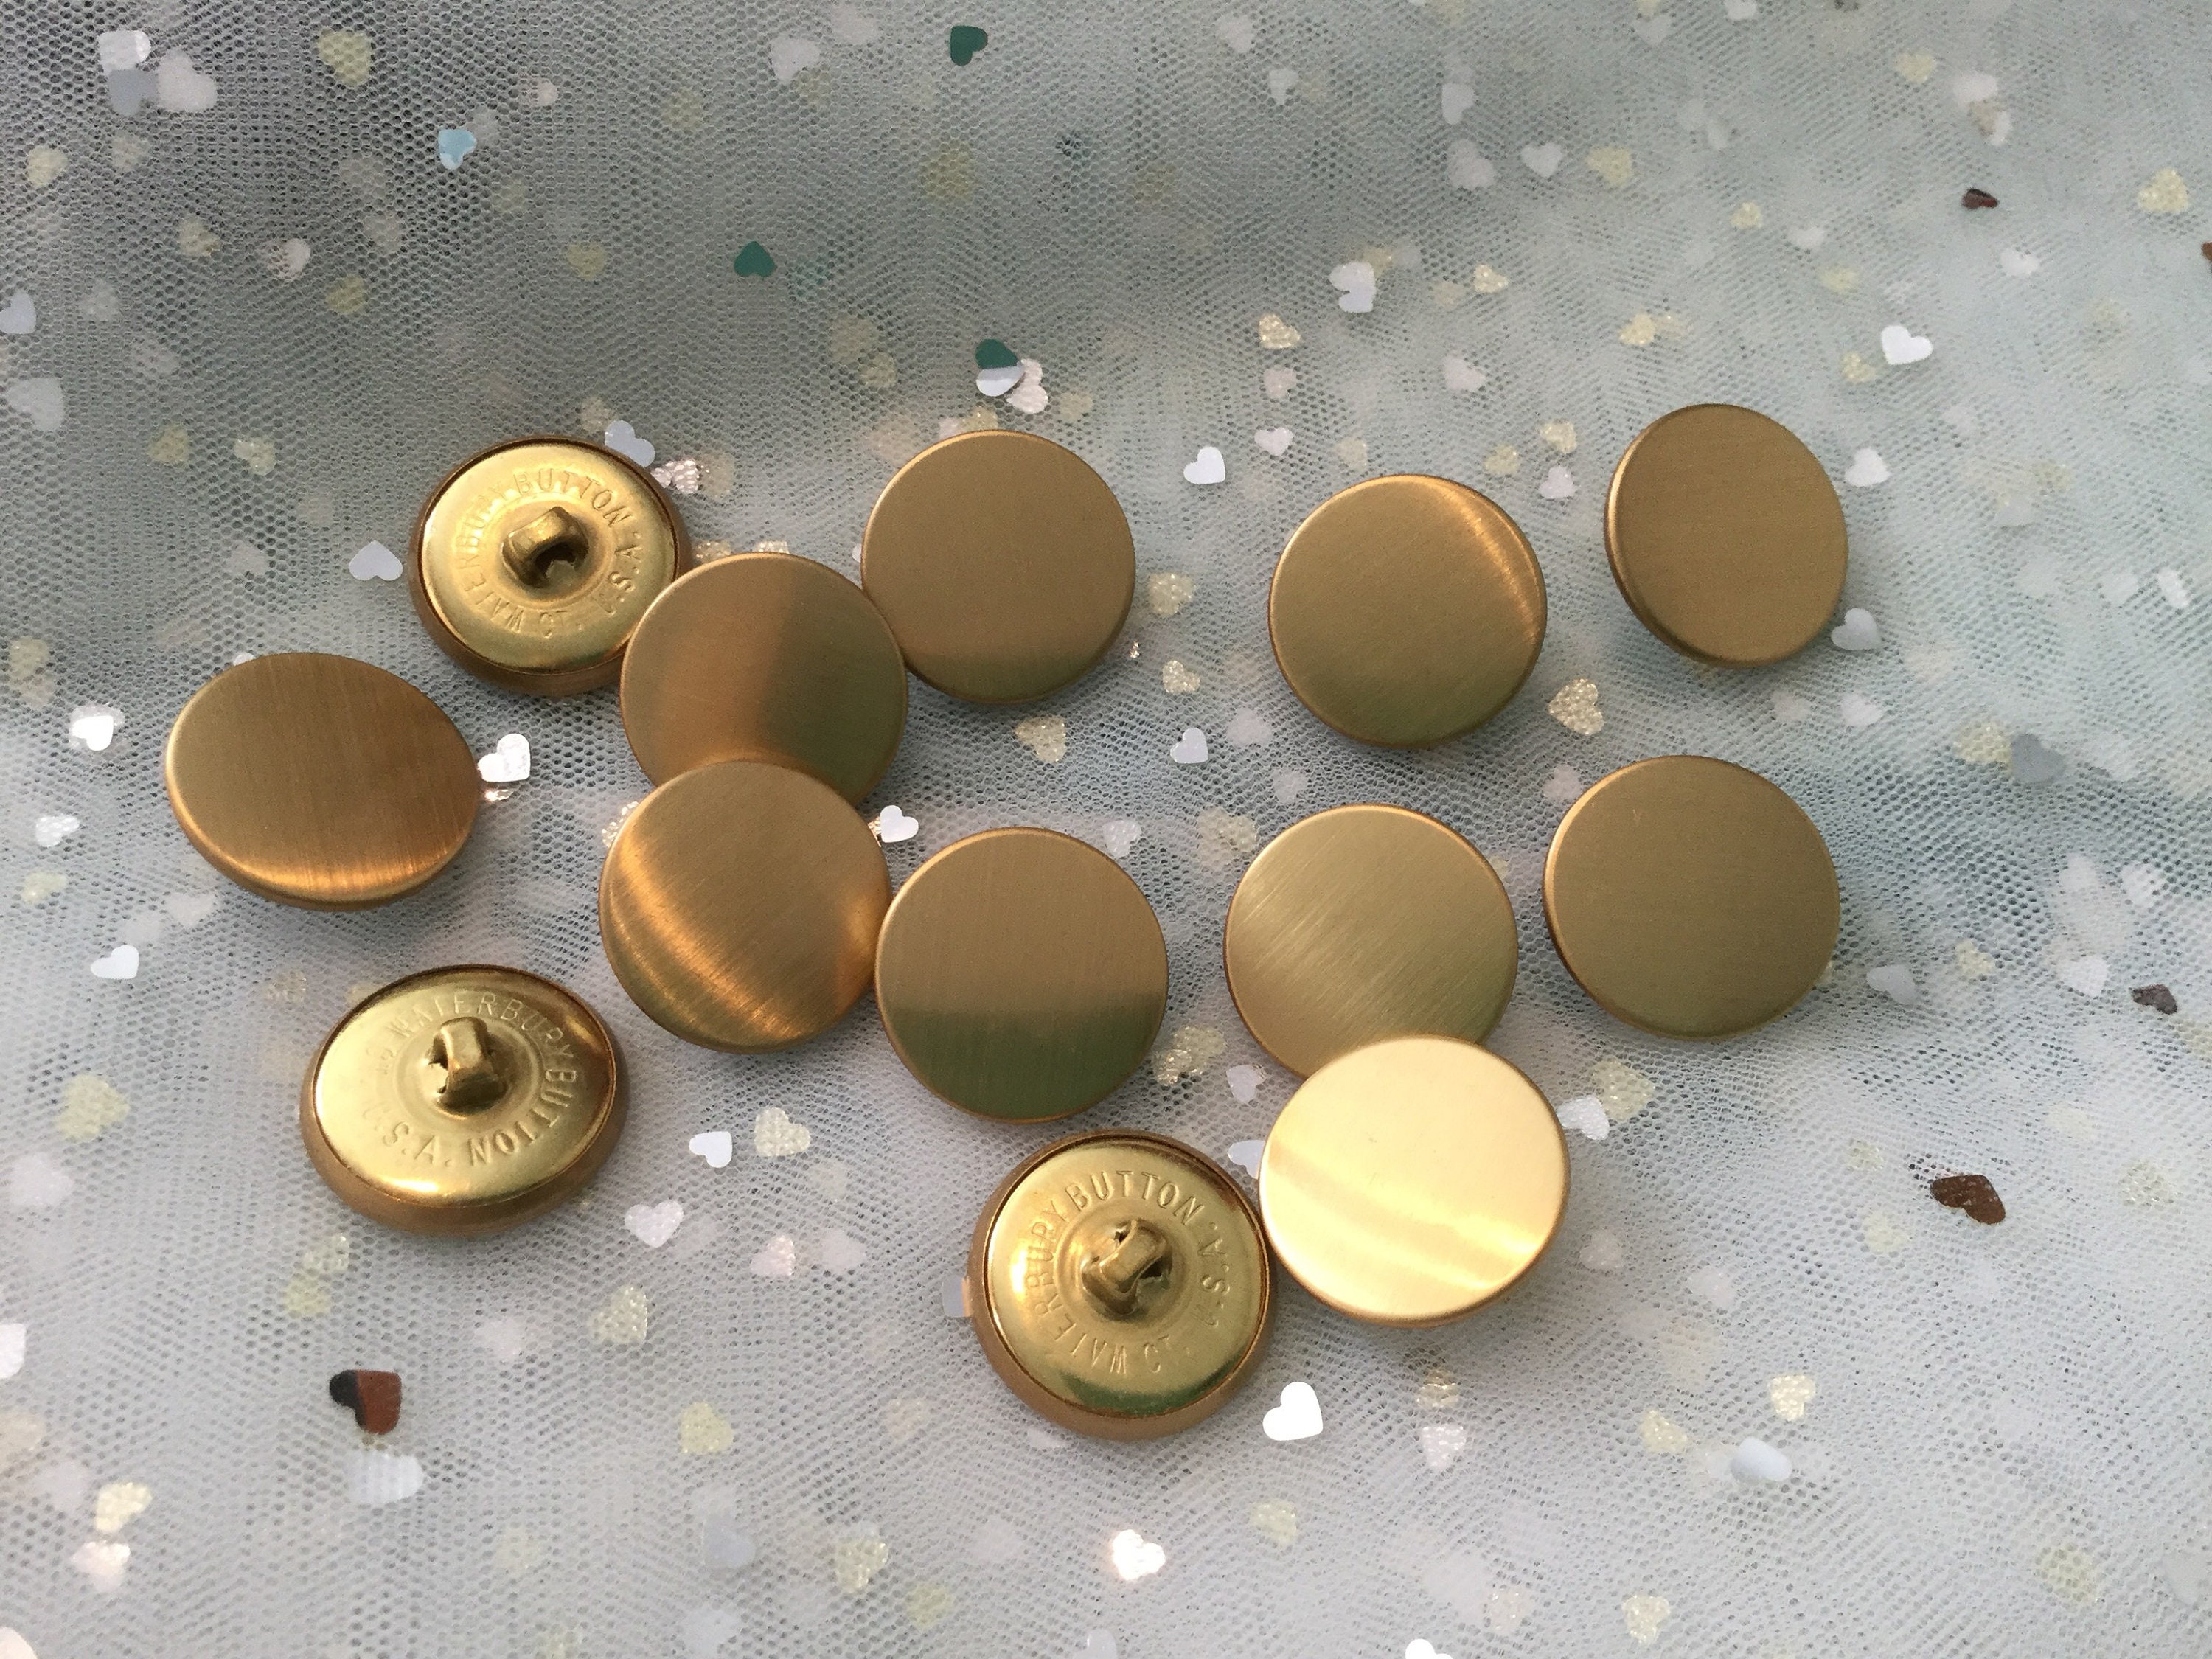 6 x Genuine Waterbury Button Company new brushed gold flat top | Etsy